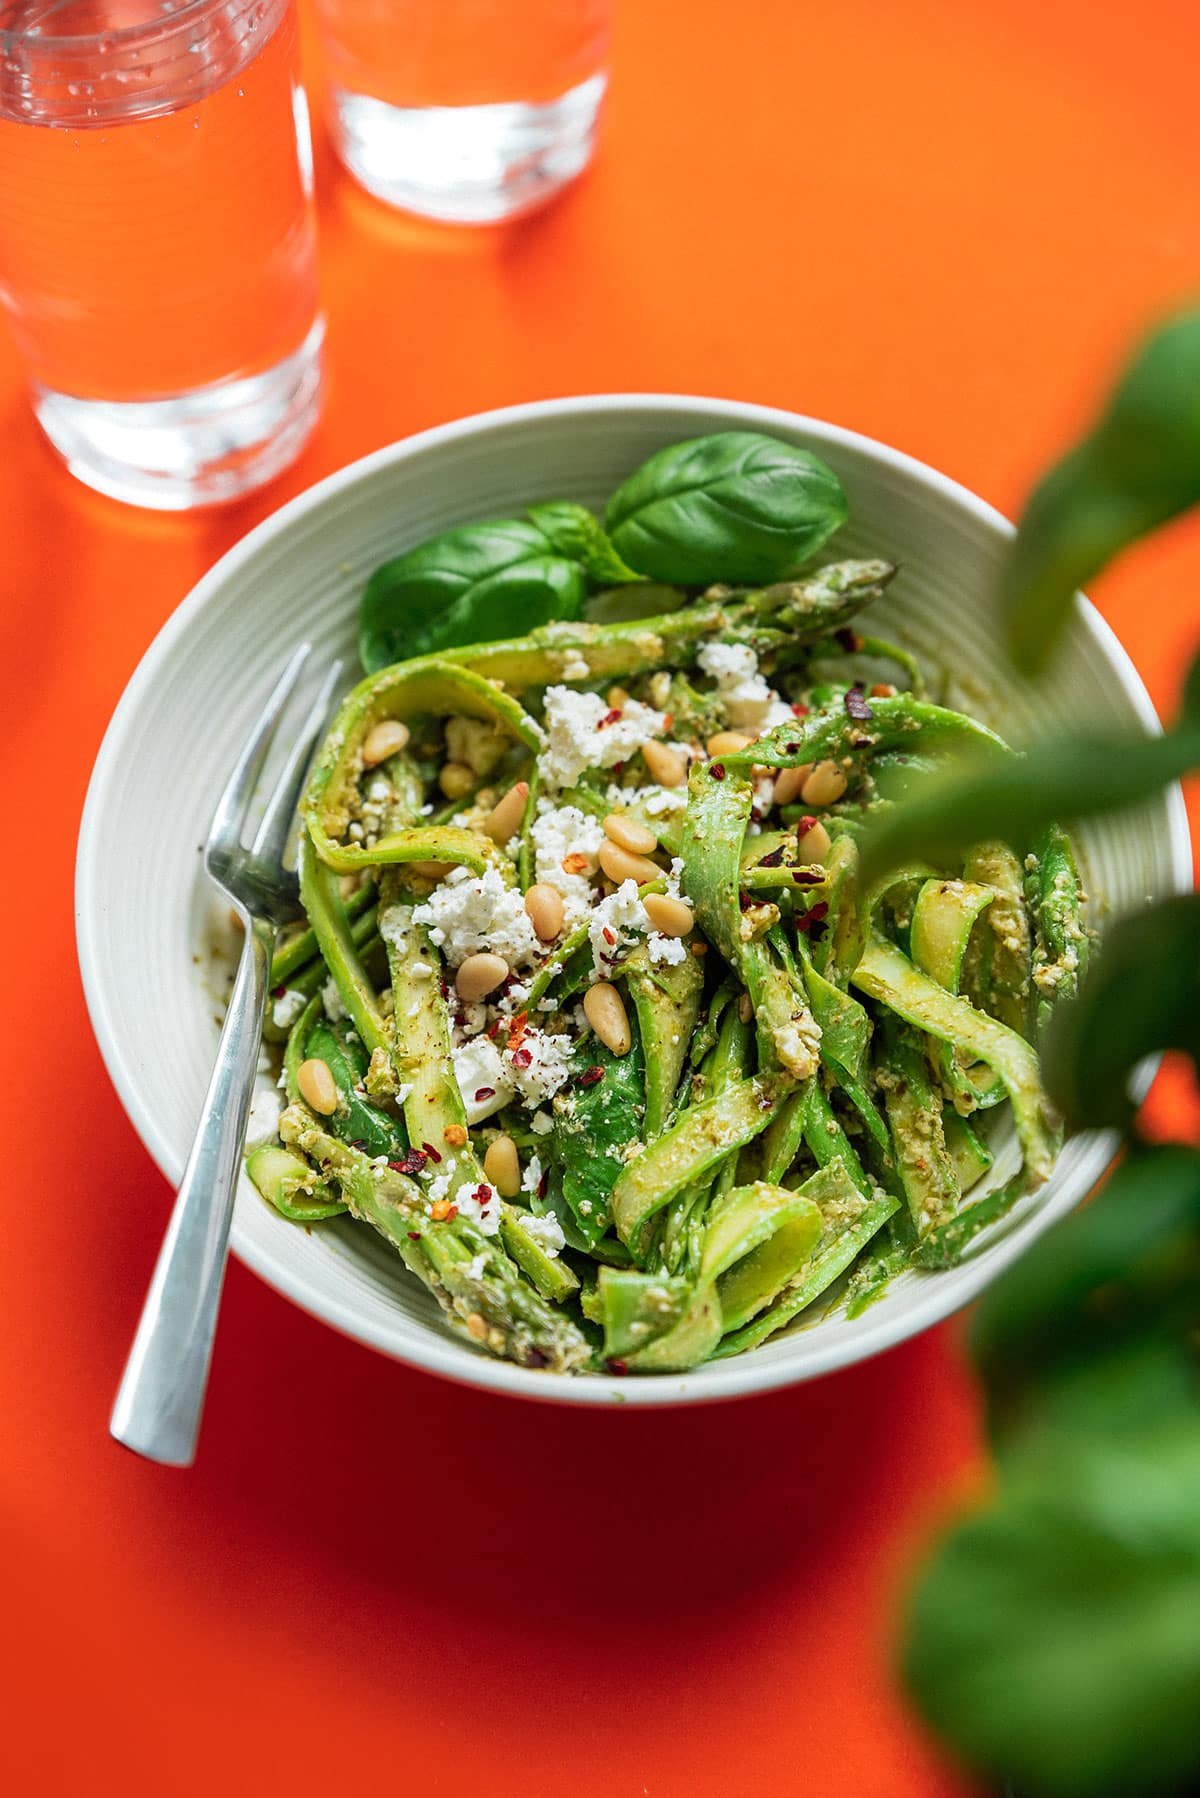 Asparagus noodles in a bowl with pesto.